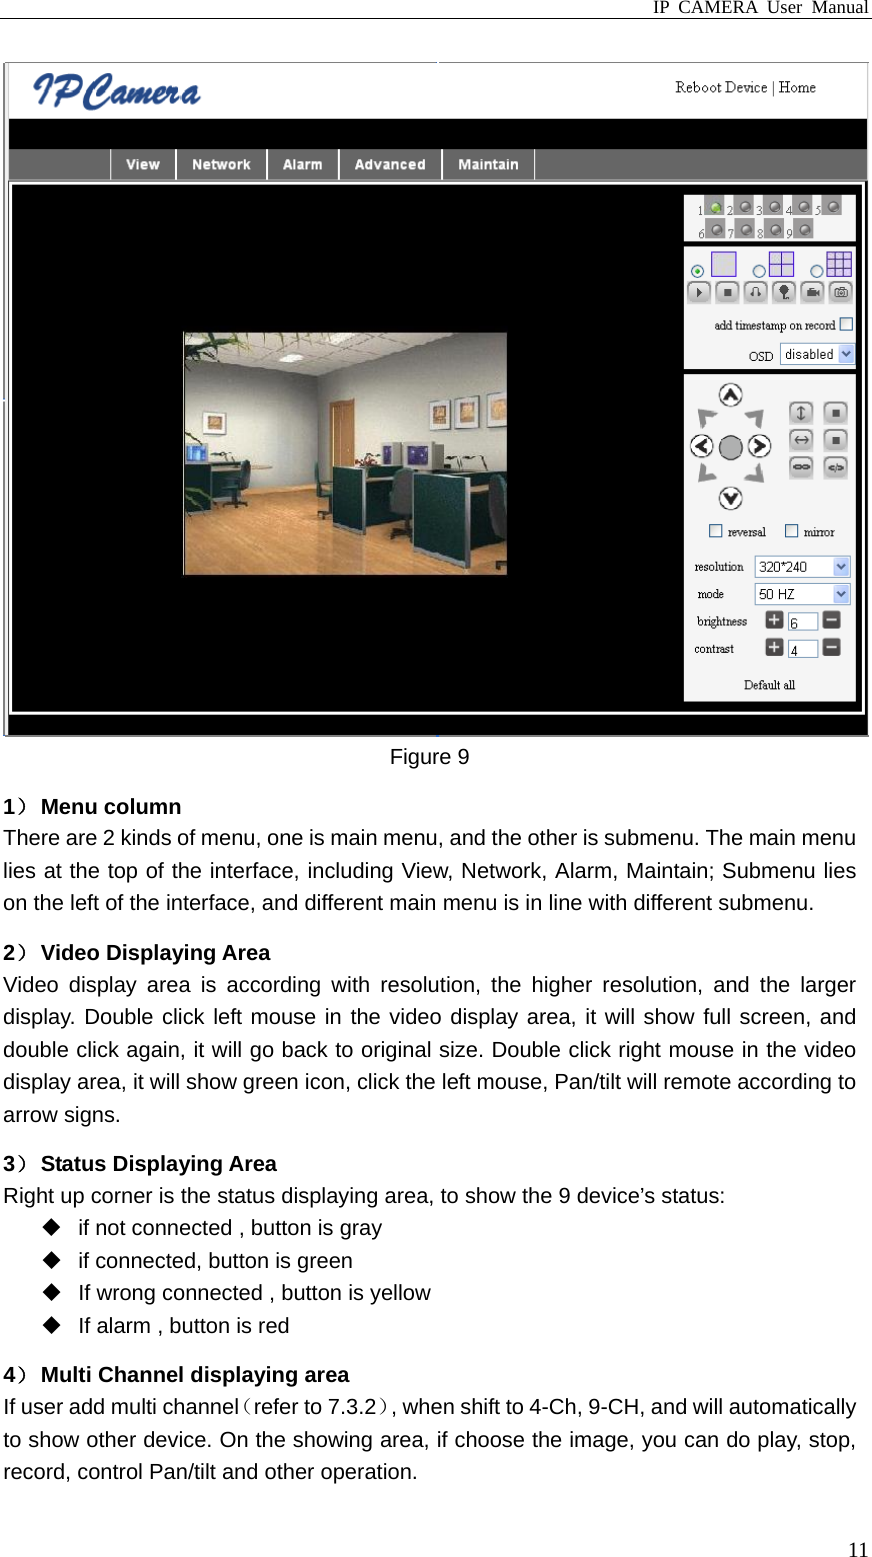 IP CAMERA User Manual  11 Figure 9 1） Menu column There are 2 kinds of menu, one is main menu, and the other is submenu. The main menu lies at the top of the interface, including View, Network, Alarm, Maintain; Submenu lies on the left of the interface, and different main menu is in line with different submenu. 2） Video Displaying Area Video display area is according with resolution, the higher resolution, and the larger display. Double click left mouse in the video display area, it will show full screen, and double click again, it will go back to original size. Double click right mouse in the video display area, it will show green icon, click the left mouse, Pan/tilt will remote according to arrow signs. 3） Status Displaying Area Right up corner is the status displaying area, to show the 9 device’s status:  if not connected , button is gray   if connected, button is green   If wrong connected , button is yellow   If alarm , button is red 4） Multi Channel displaying area If user add multi channel（refer to 7.3.2）, when shift to 4-Ch, 9-CH, and will automatically to show other device. On the showing area, if choose the image, you can do play, stop, record, control Pan/tilt and other operation. 